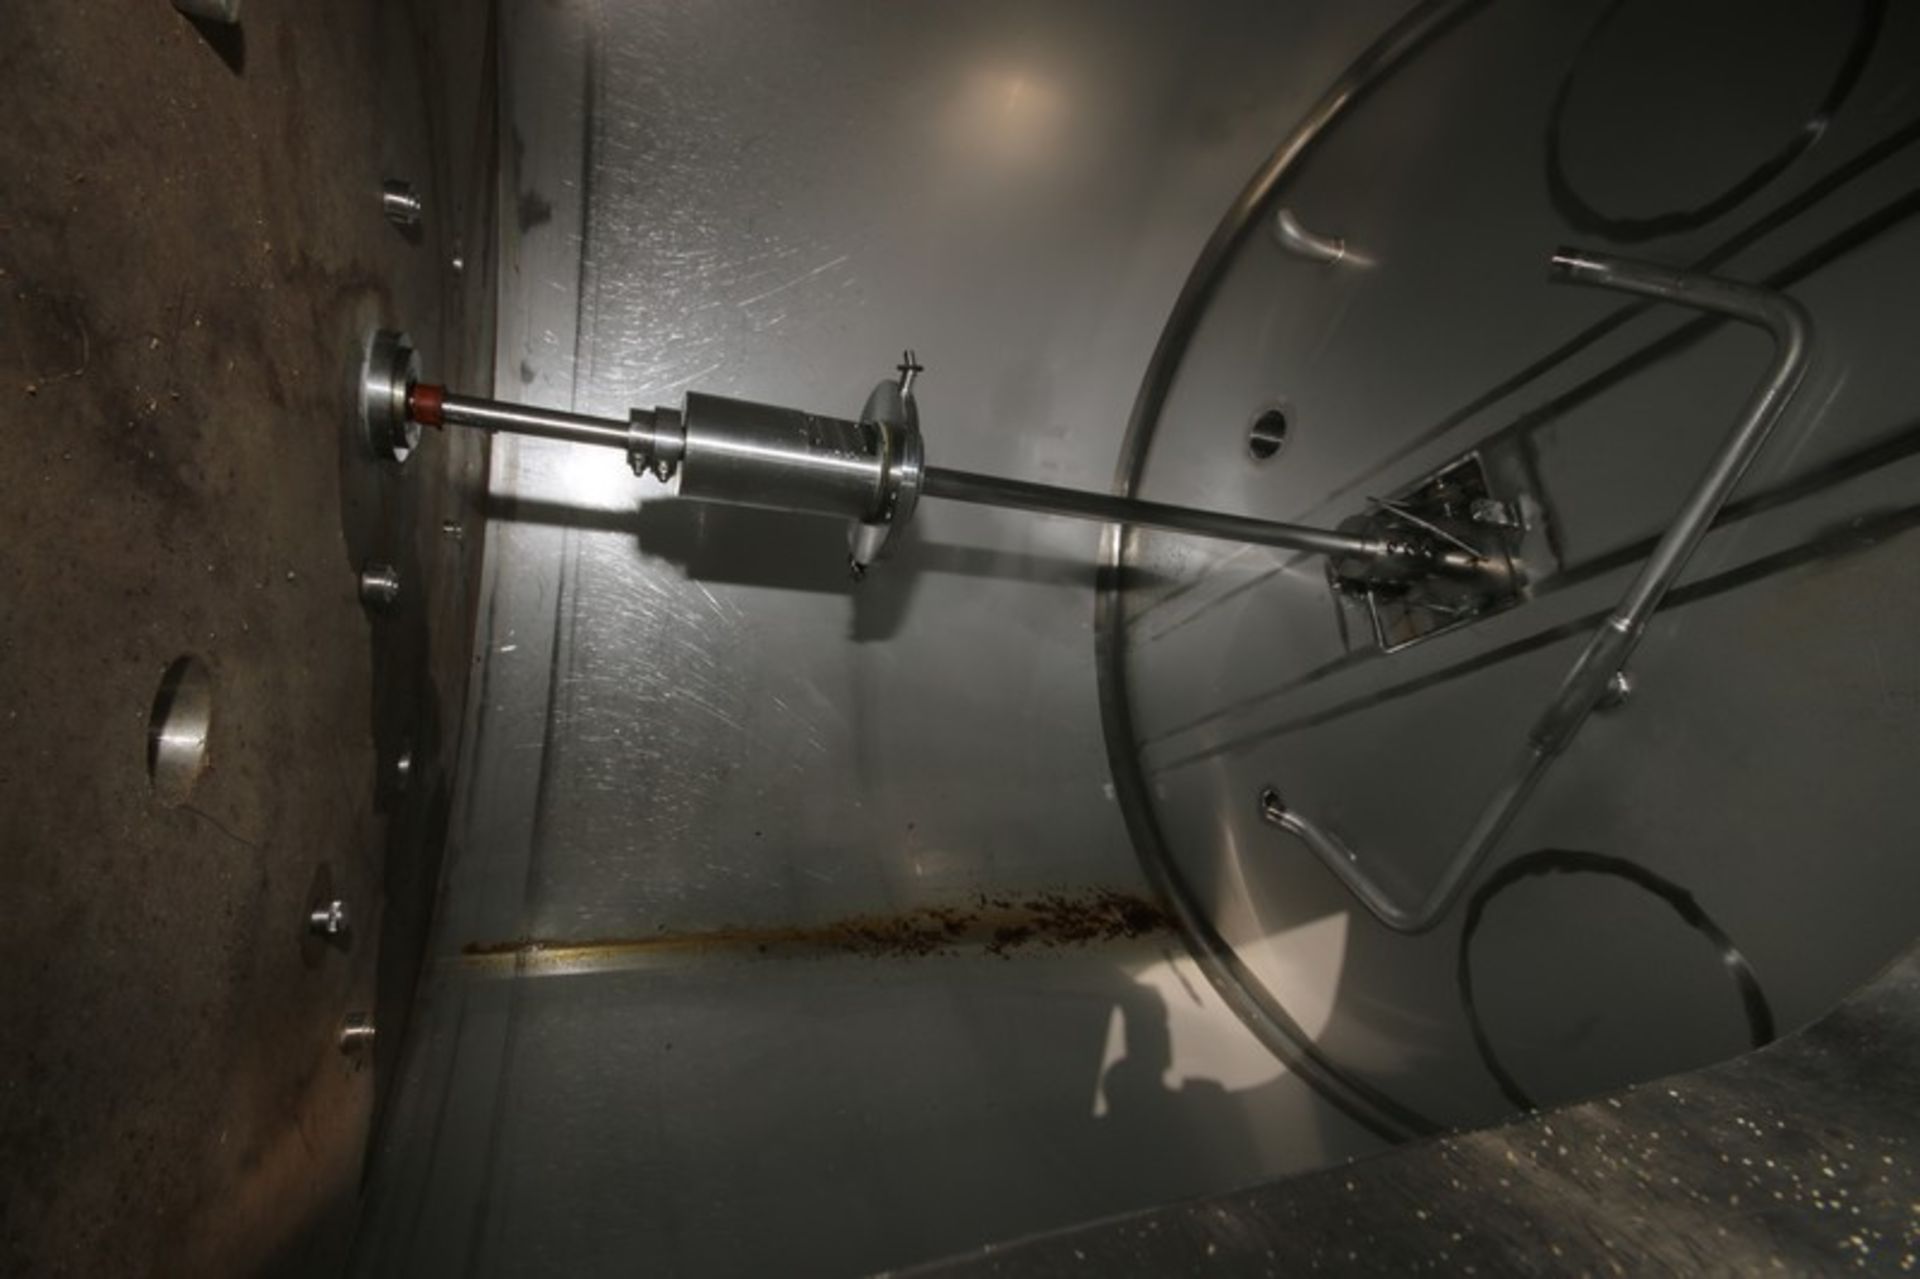 Munker/Braulogistik 15hL Combination Mash Tun/Kettle, M/N Brewhouse, S/N 1, 208 Volts, 3 Phase, with - Image 12 of 24